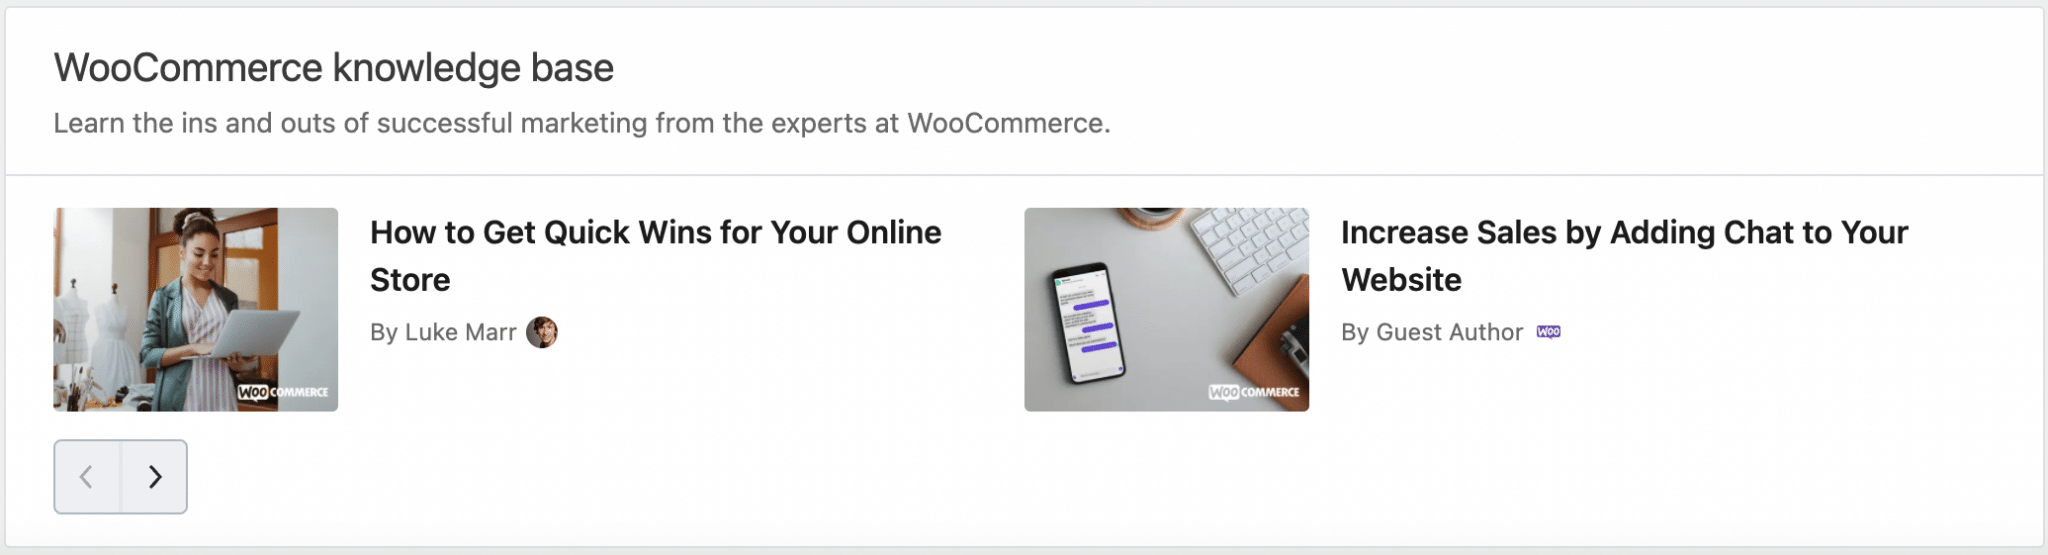 WooCommerce knowledge base overview.